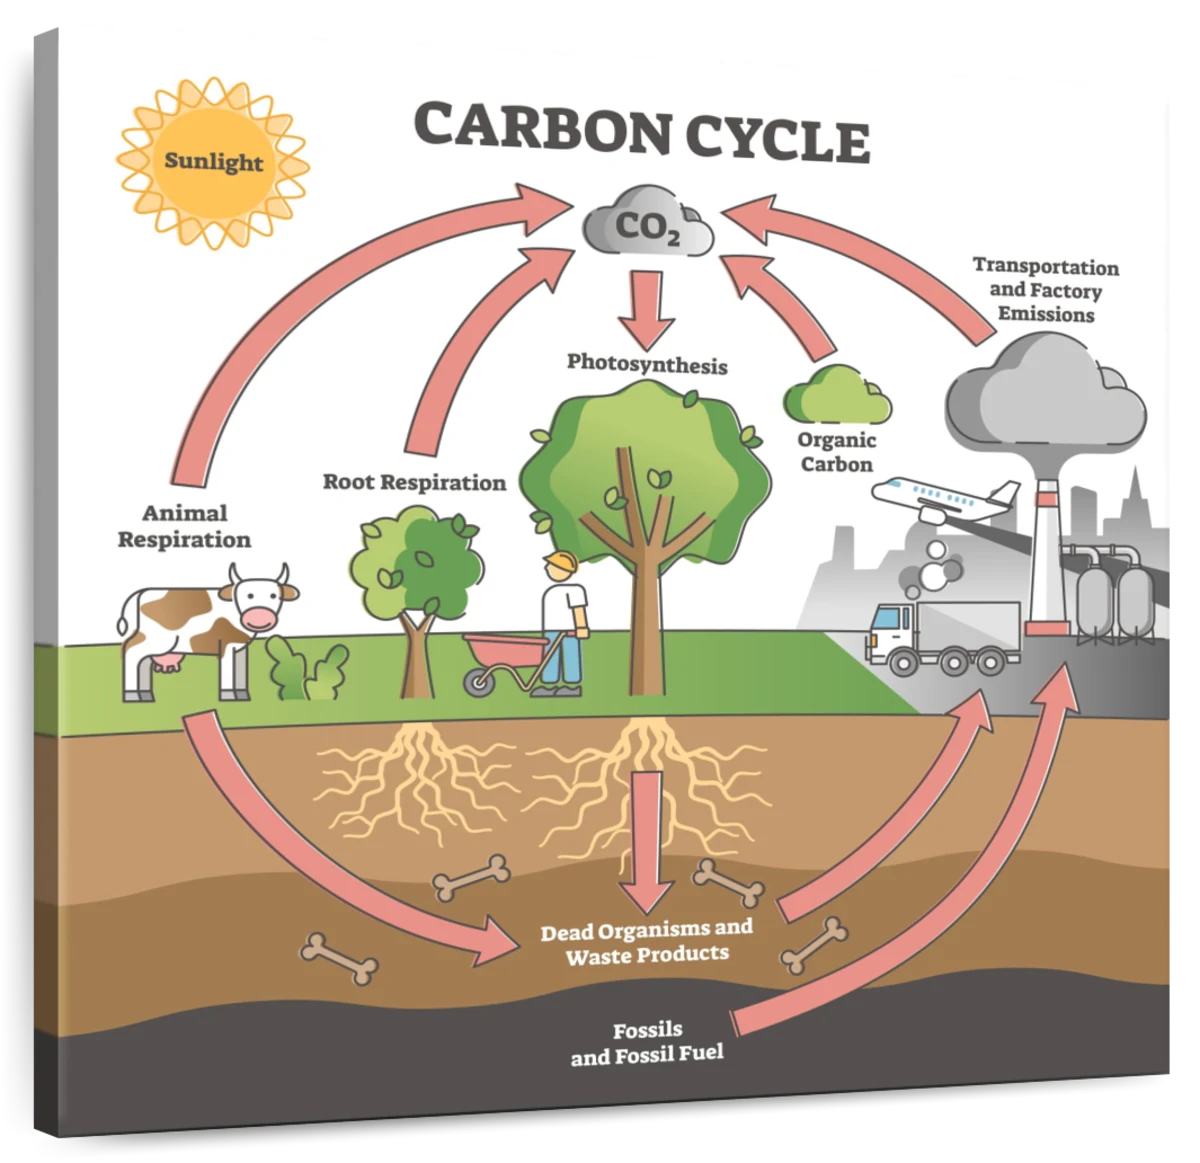 if your good at drawing pls help draw the carbon cycle and the oxygen cycle  - brainly.com